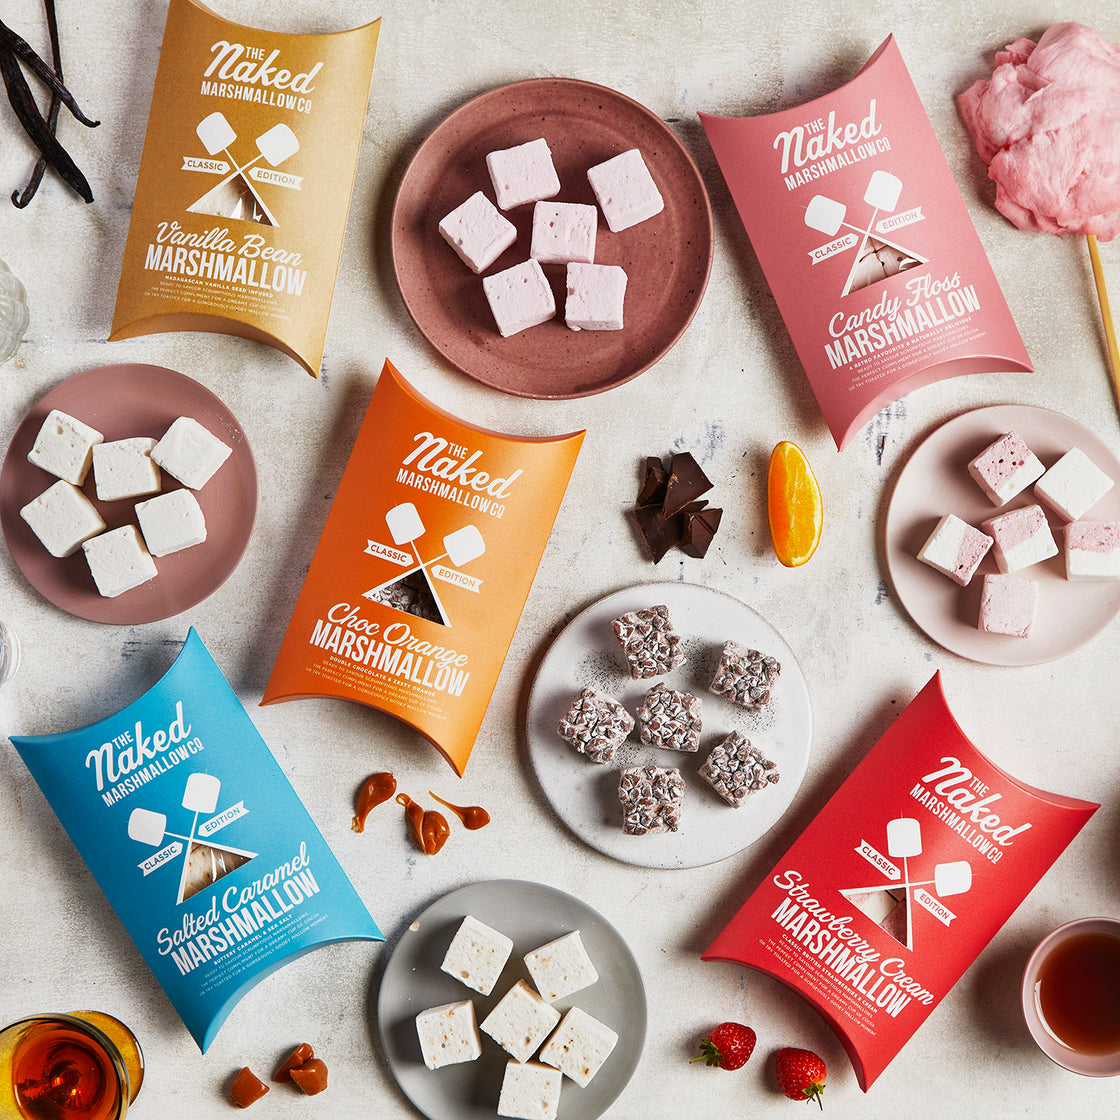 Any 5 Classic Edition Gourmet Marshmallows – The Naked Marshmallow Co